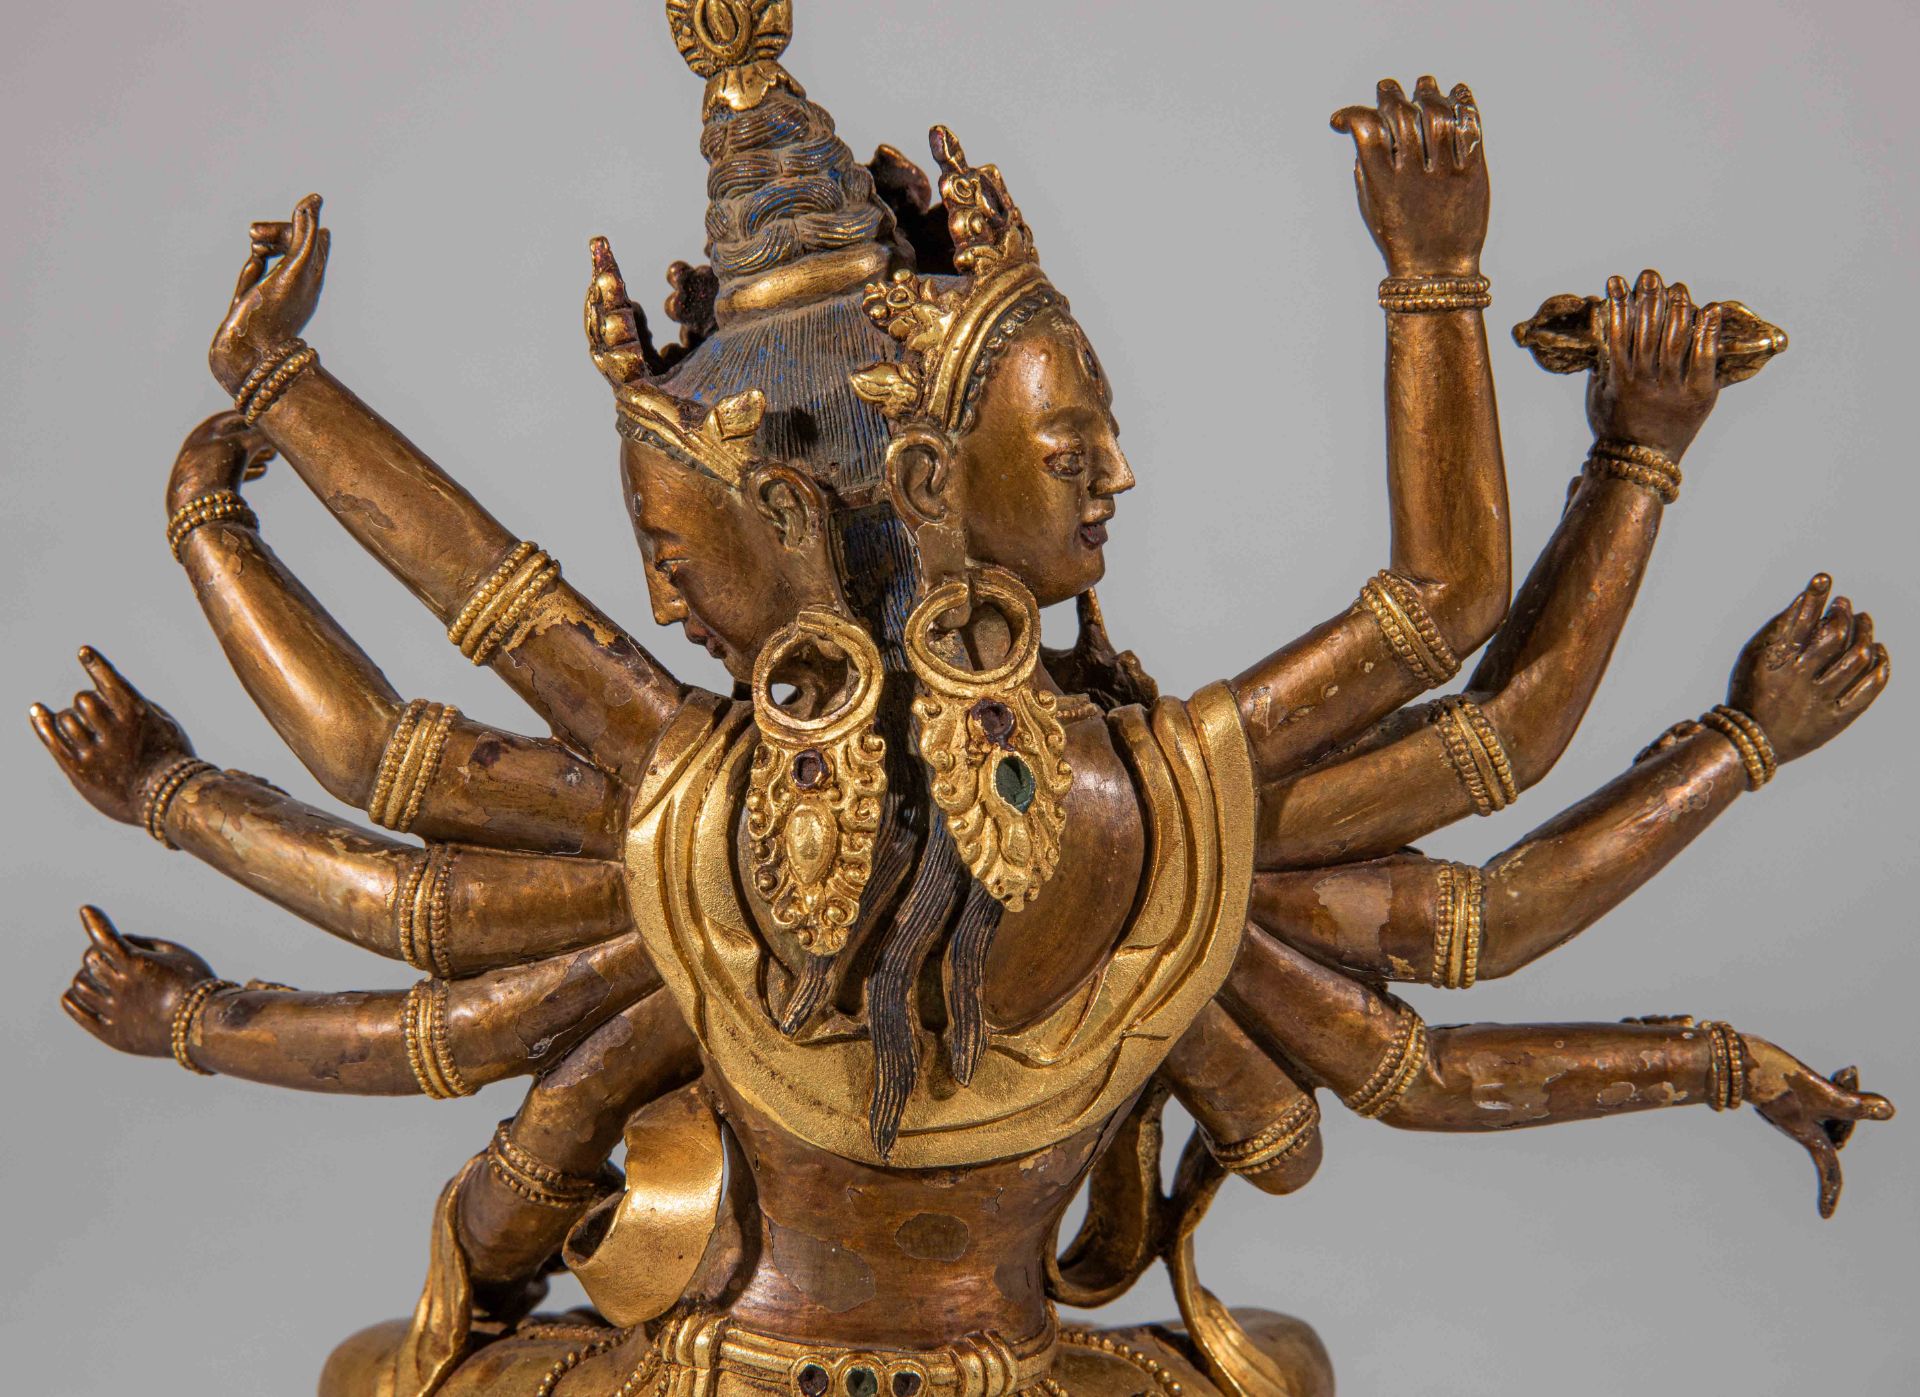 A Gilt Bronze Statue of Guanyin with Ten Arms, Qing Dynasty, China - Image 10 of 11